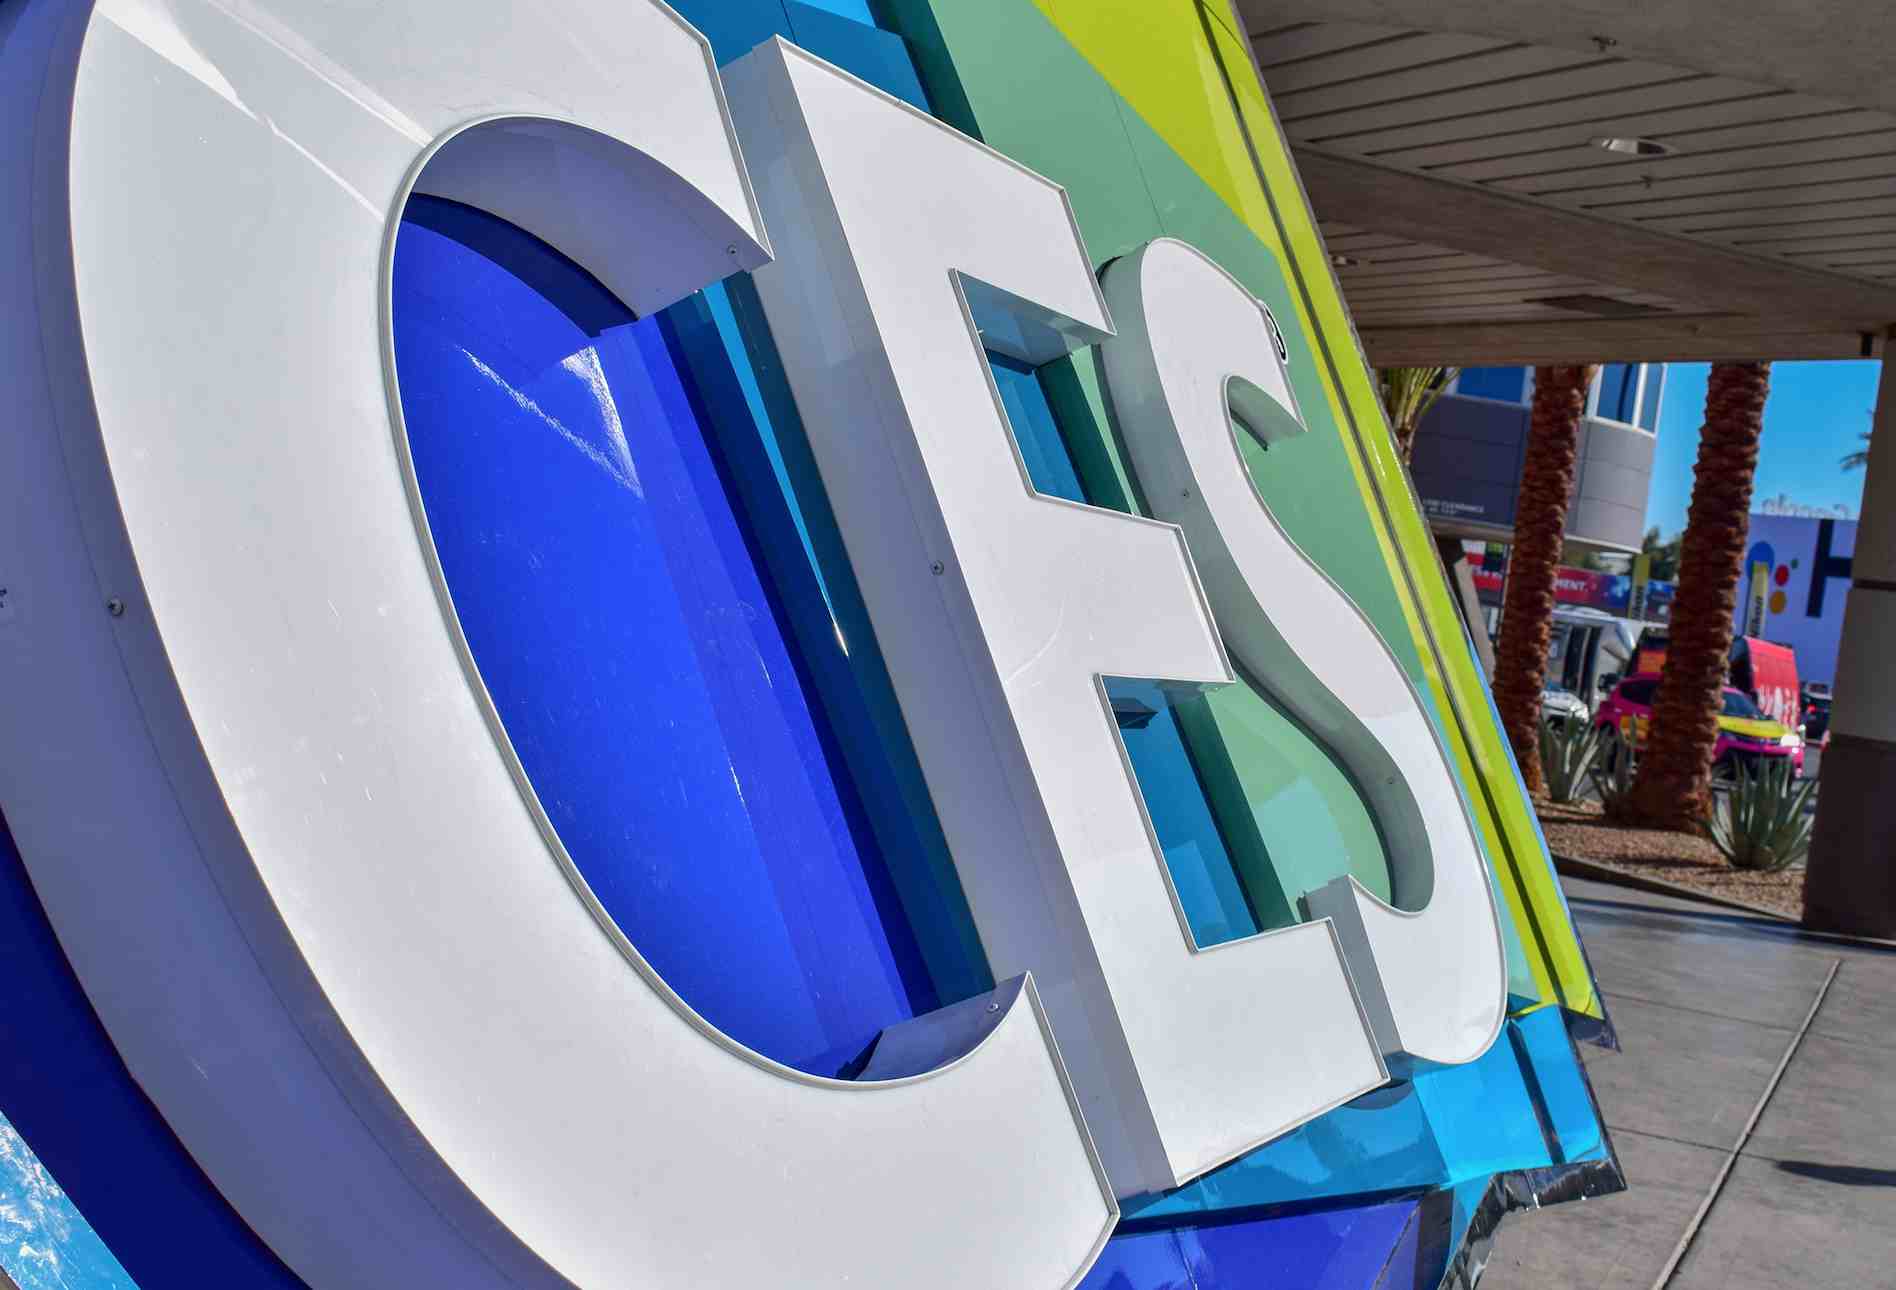 Industry leaders share their big takeaways on CES 2020